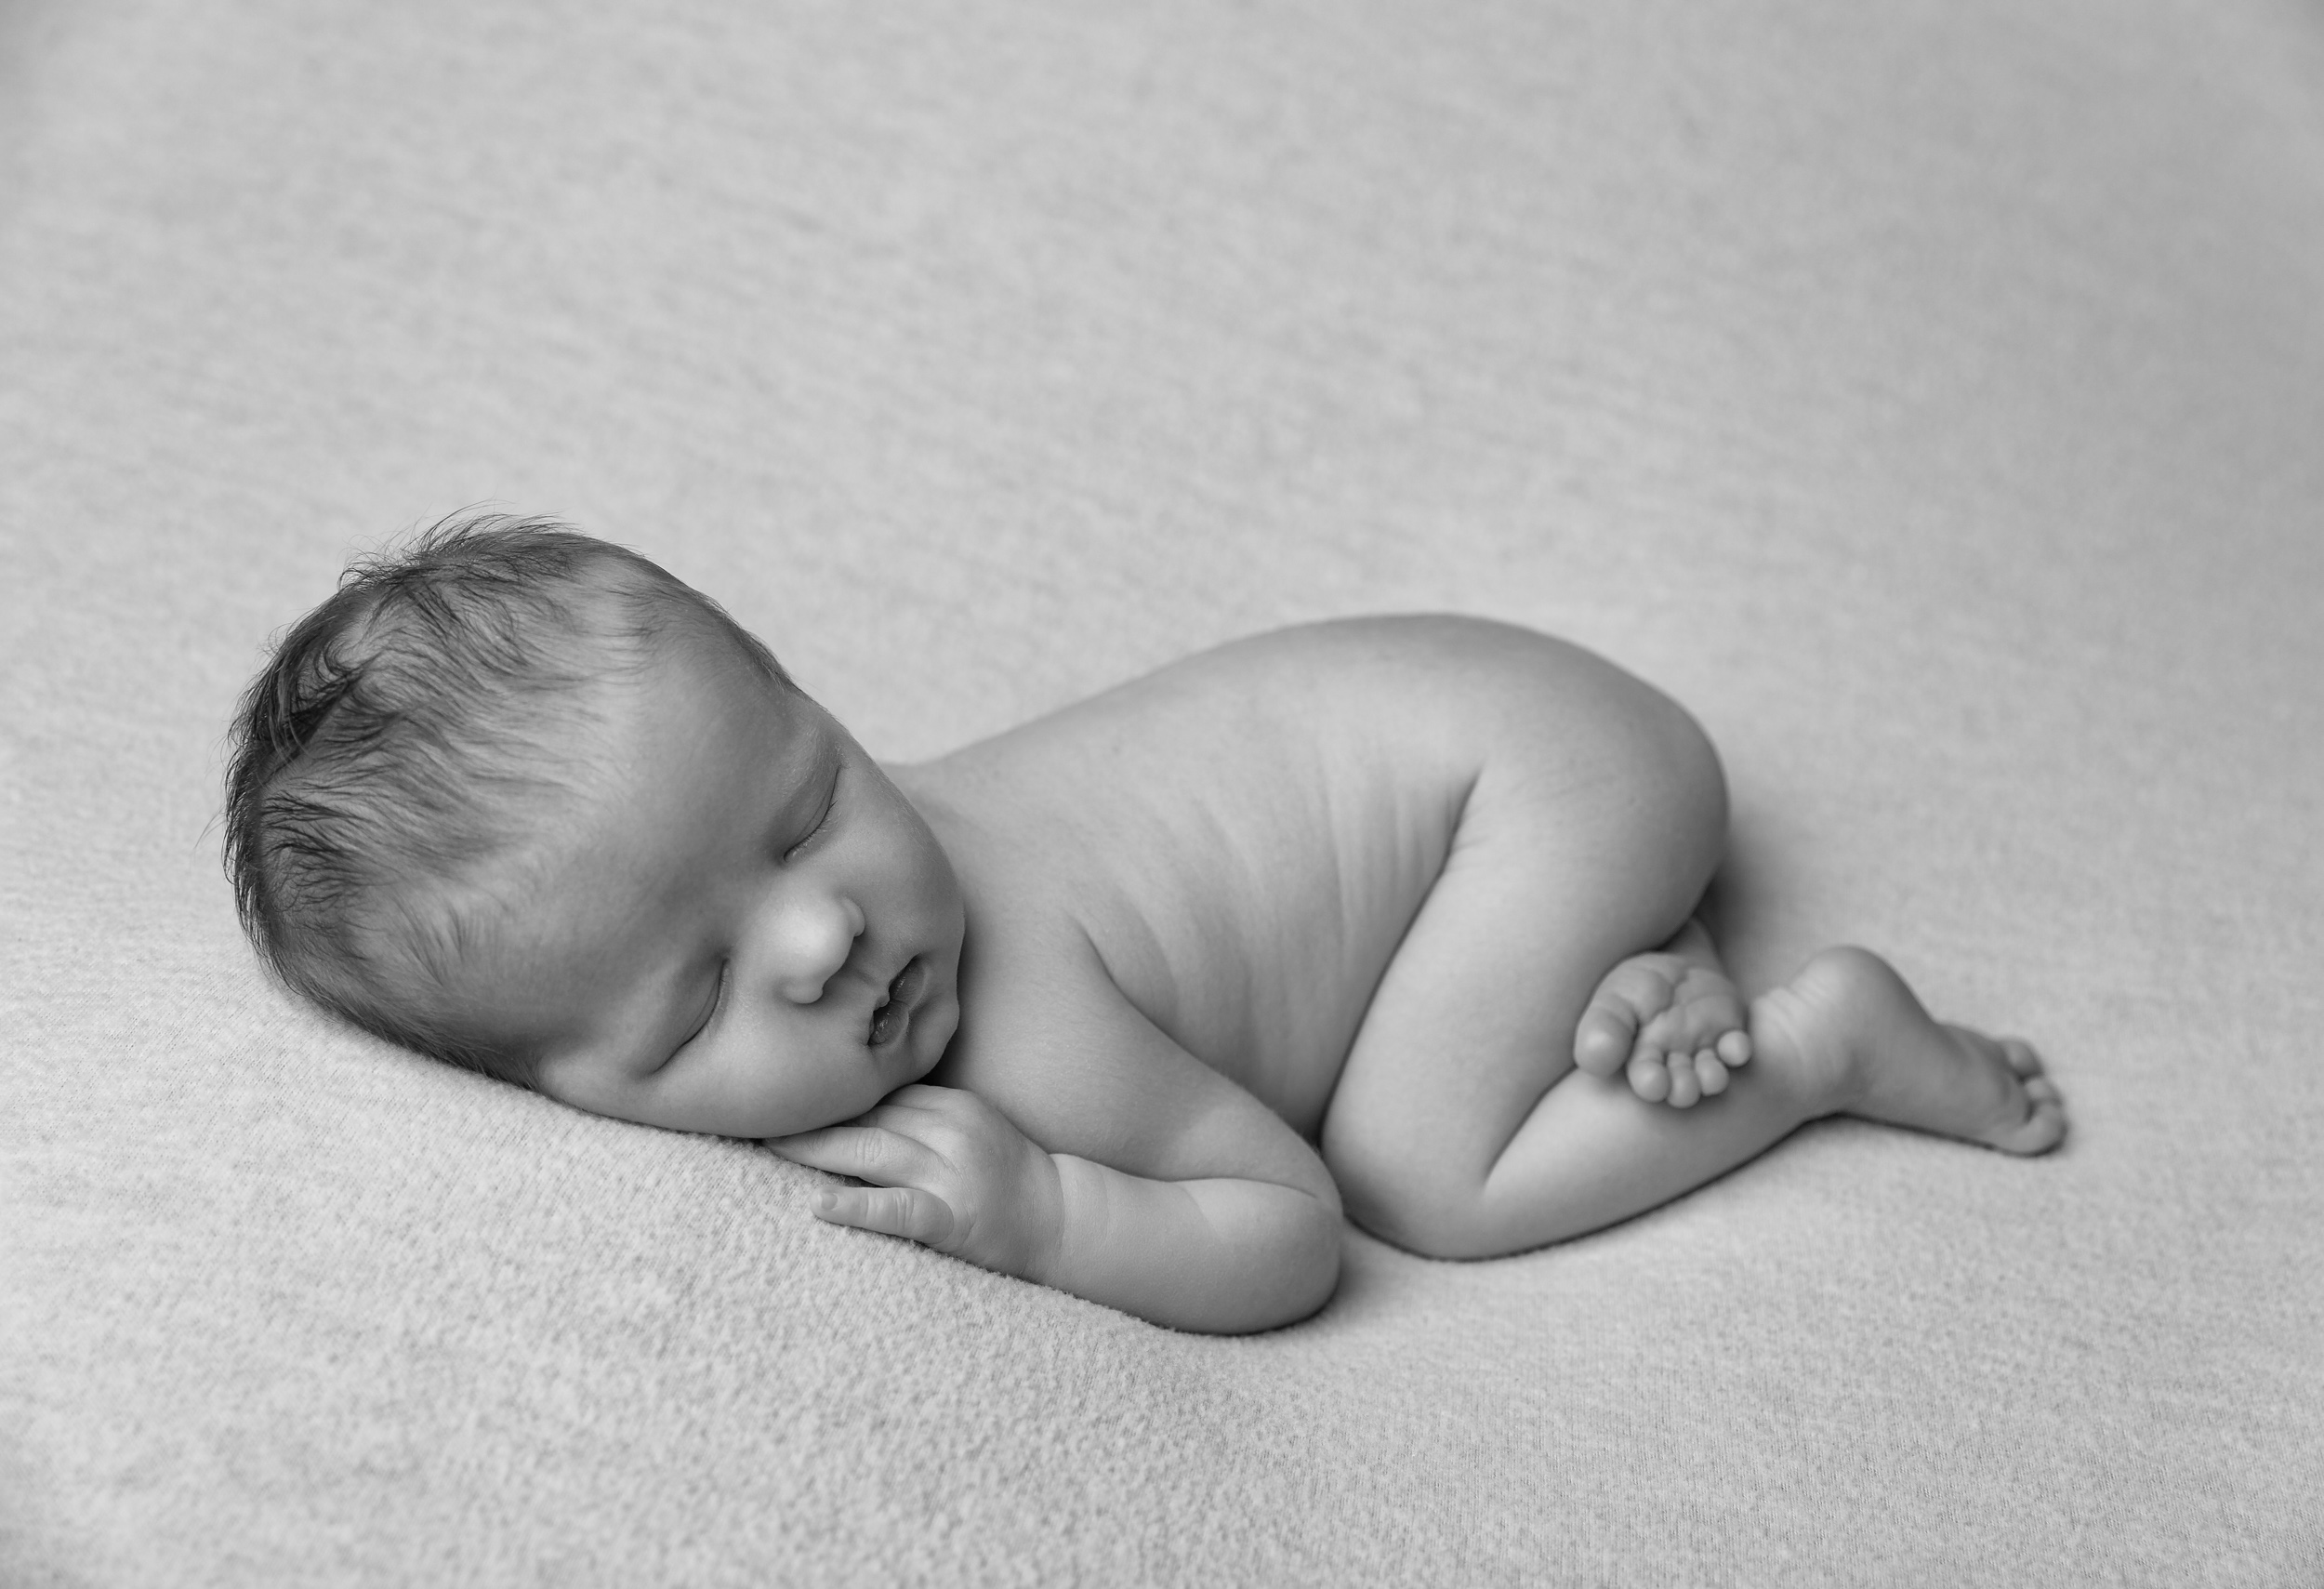 Using a dog bed in newborn photography